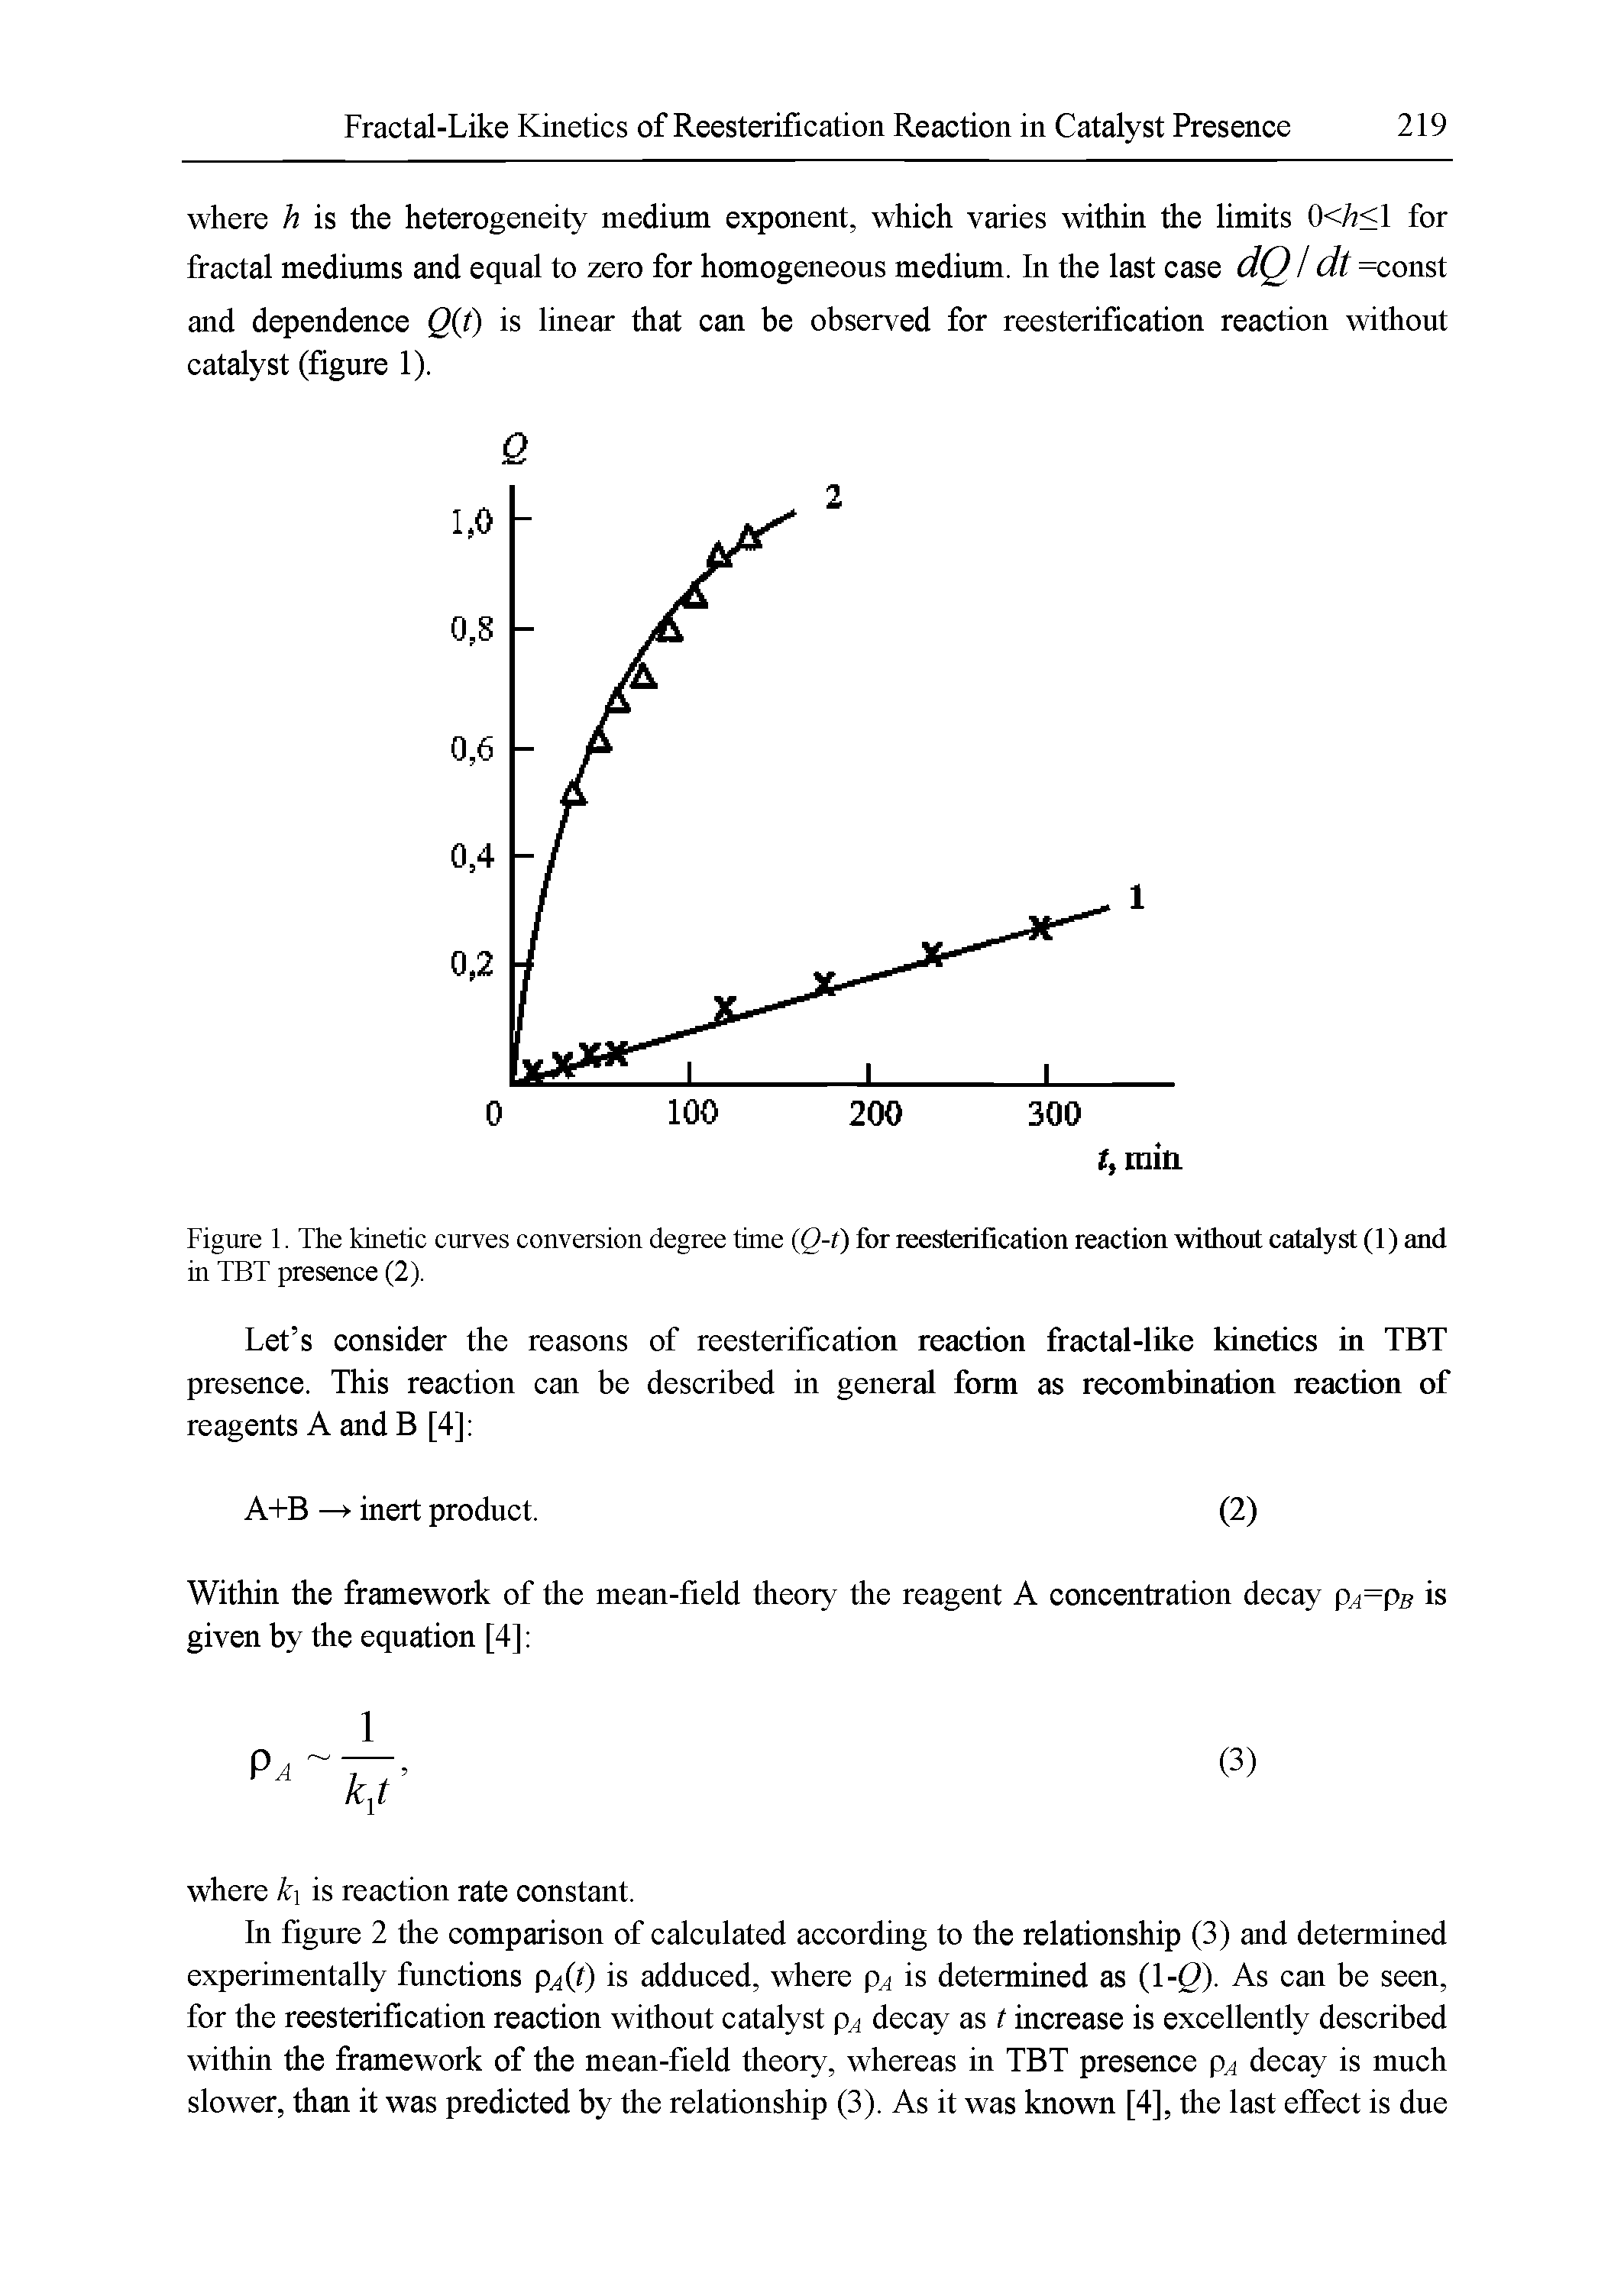 Figure 1. The kinetic curves conversion degree time (Q-t) for reesterification reaction without catalyst (1) and in TBT presence (2).